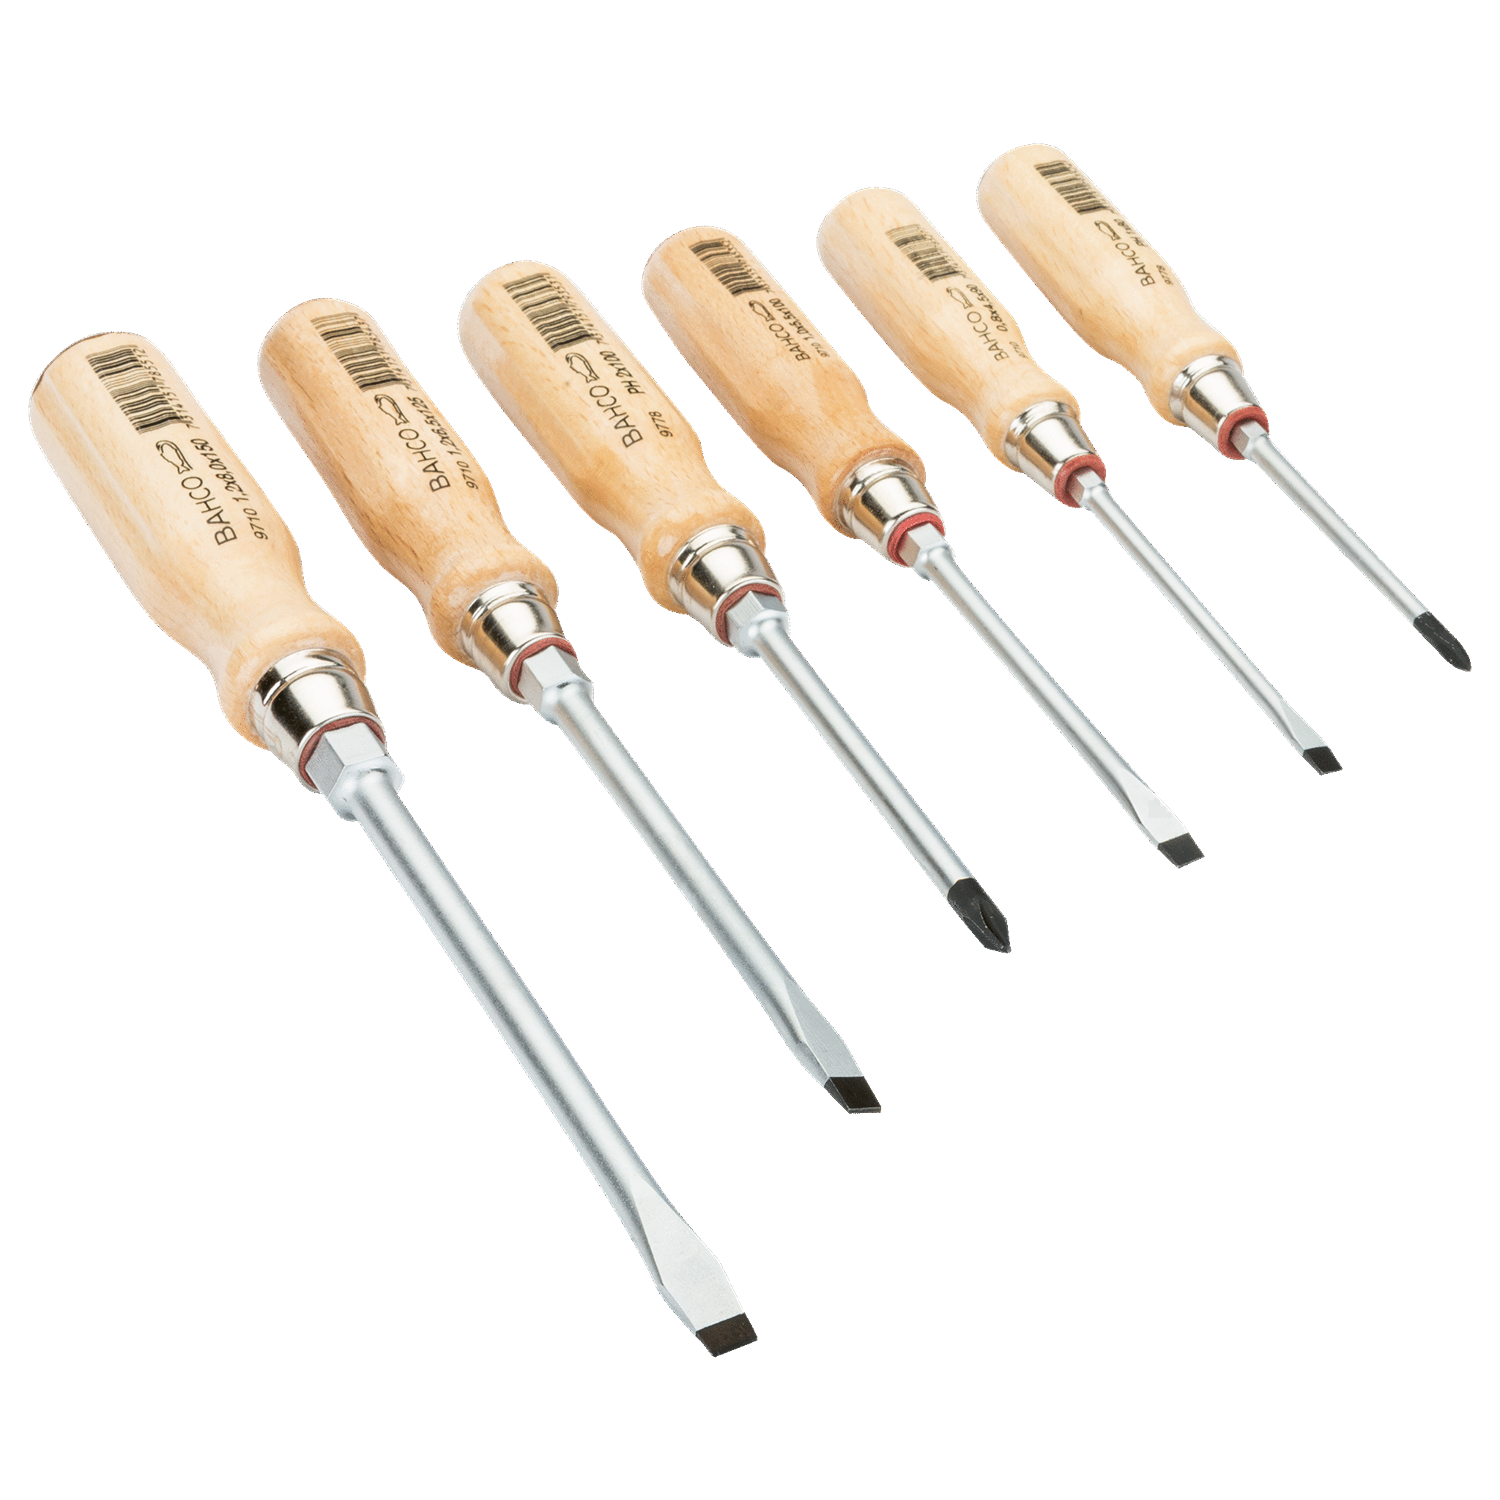 BAHCO 9710/S6 Slotted/Phillips Wooden Handle Nut Driver Set - Premium Wooden Handle Nut Driver Set from BAHCO - Shop now at Yew Aik.